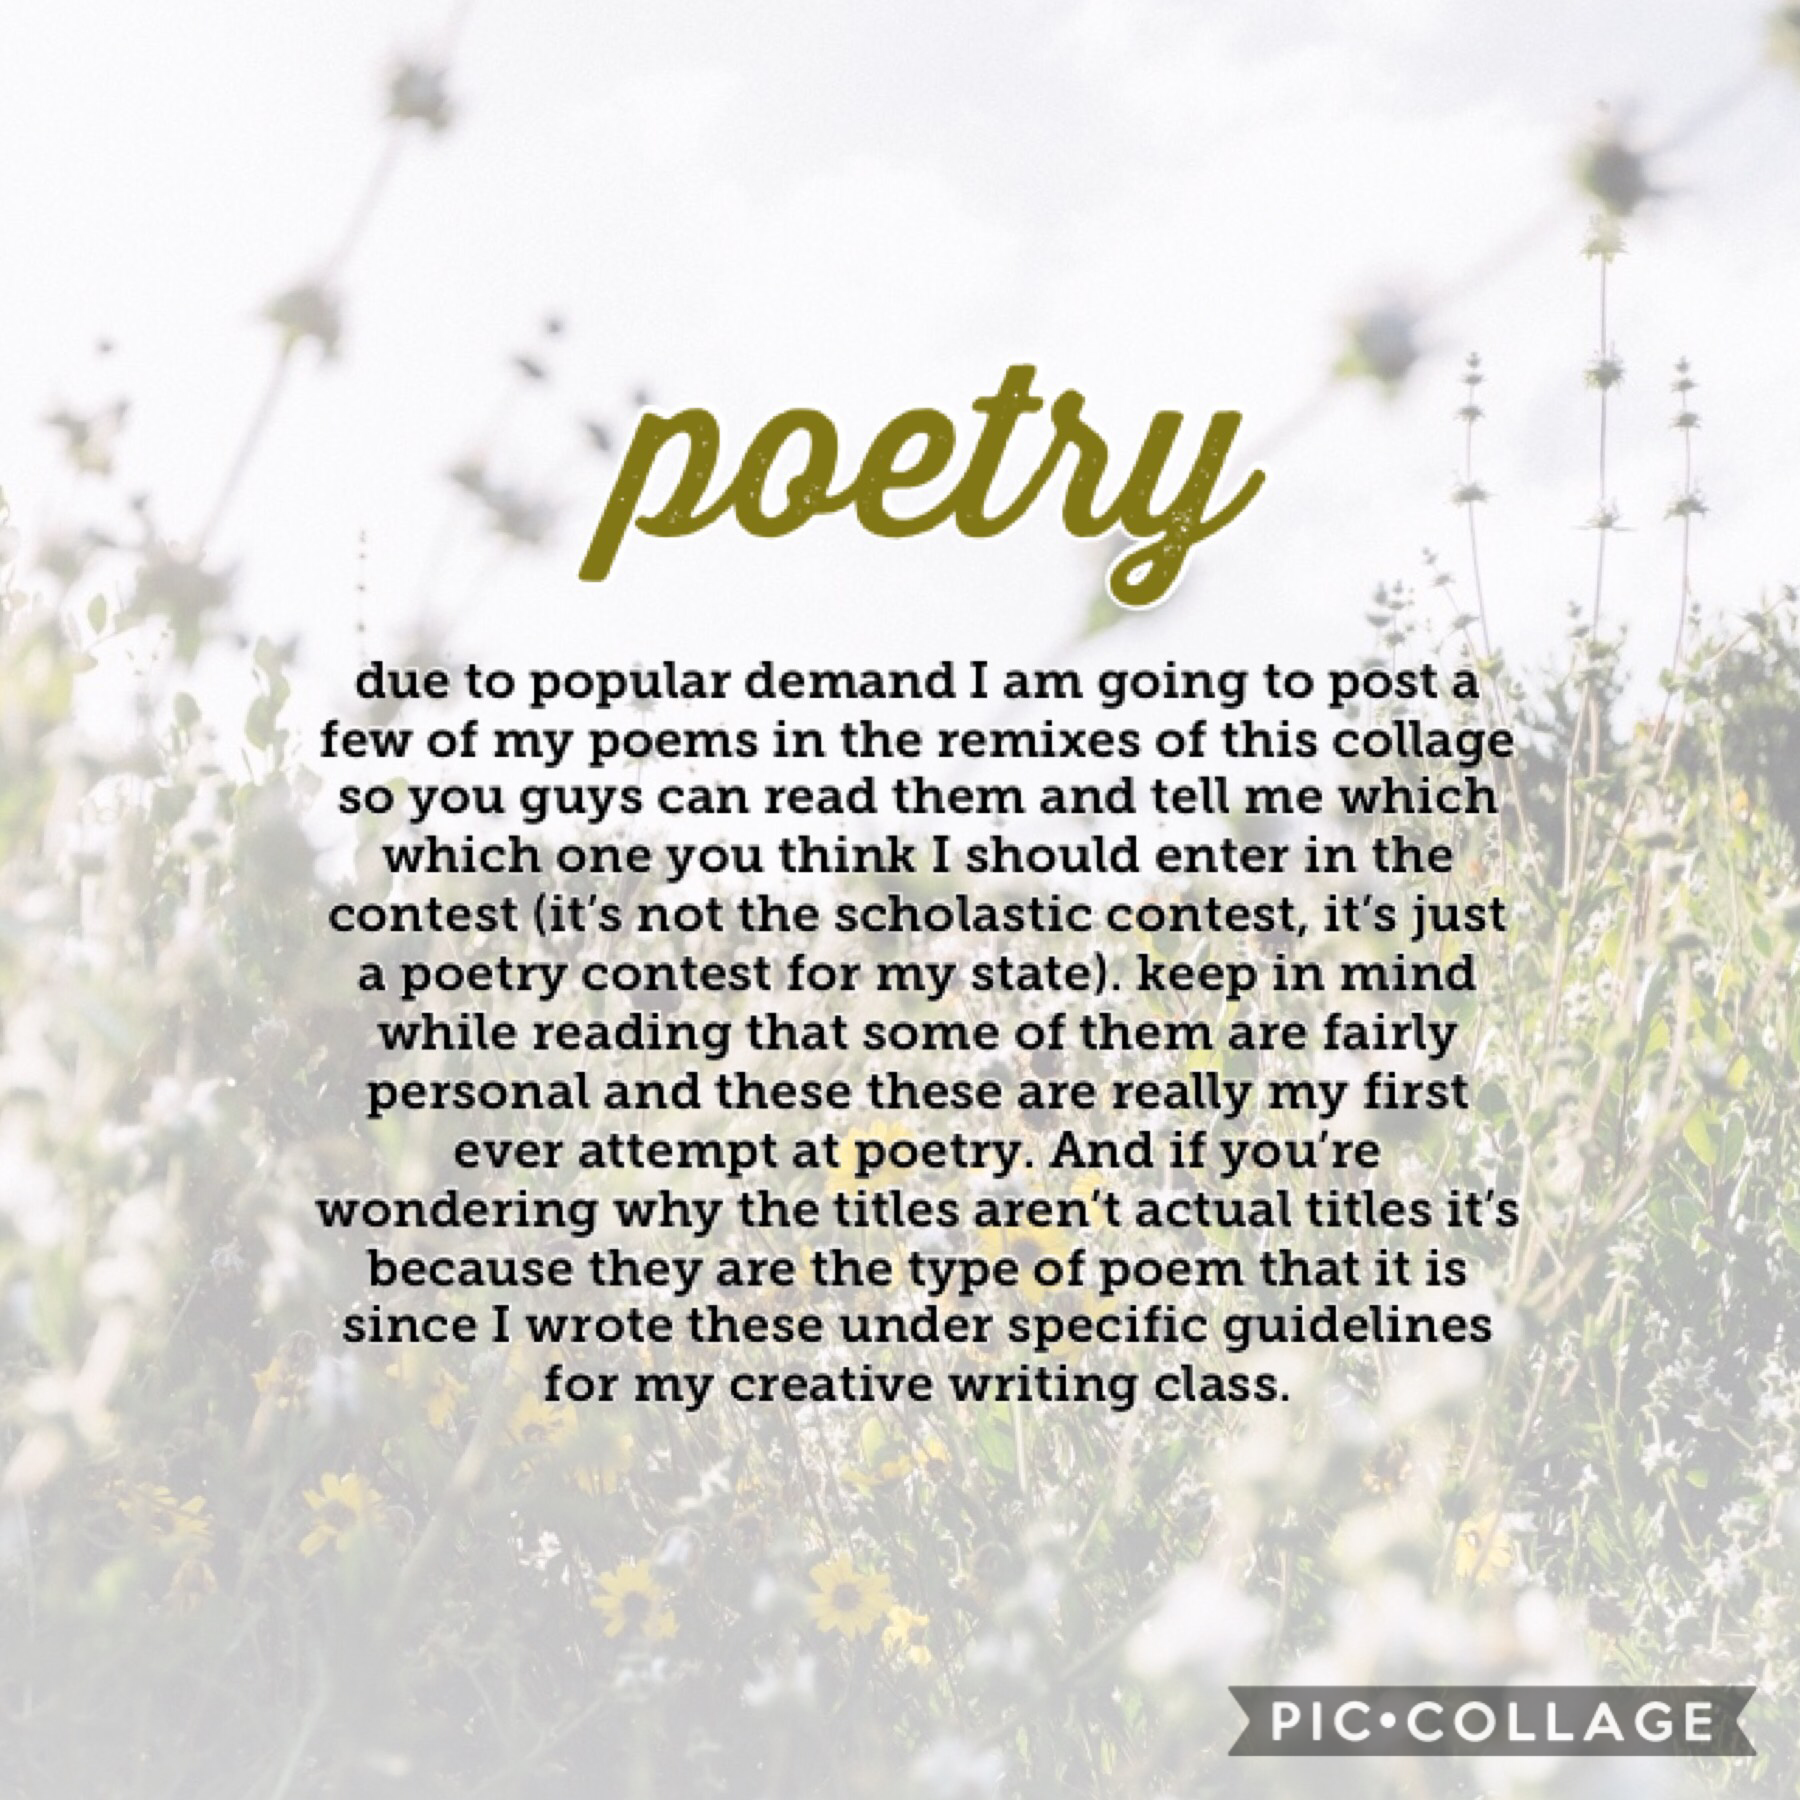 I’d love your feedback! I’m new to this whole poetry thing so if you have any advice I’d gladly take it! ✨☺️